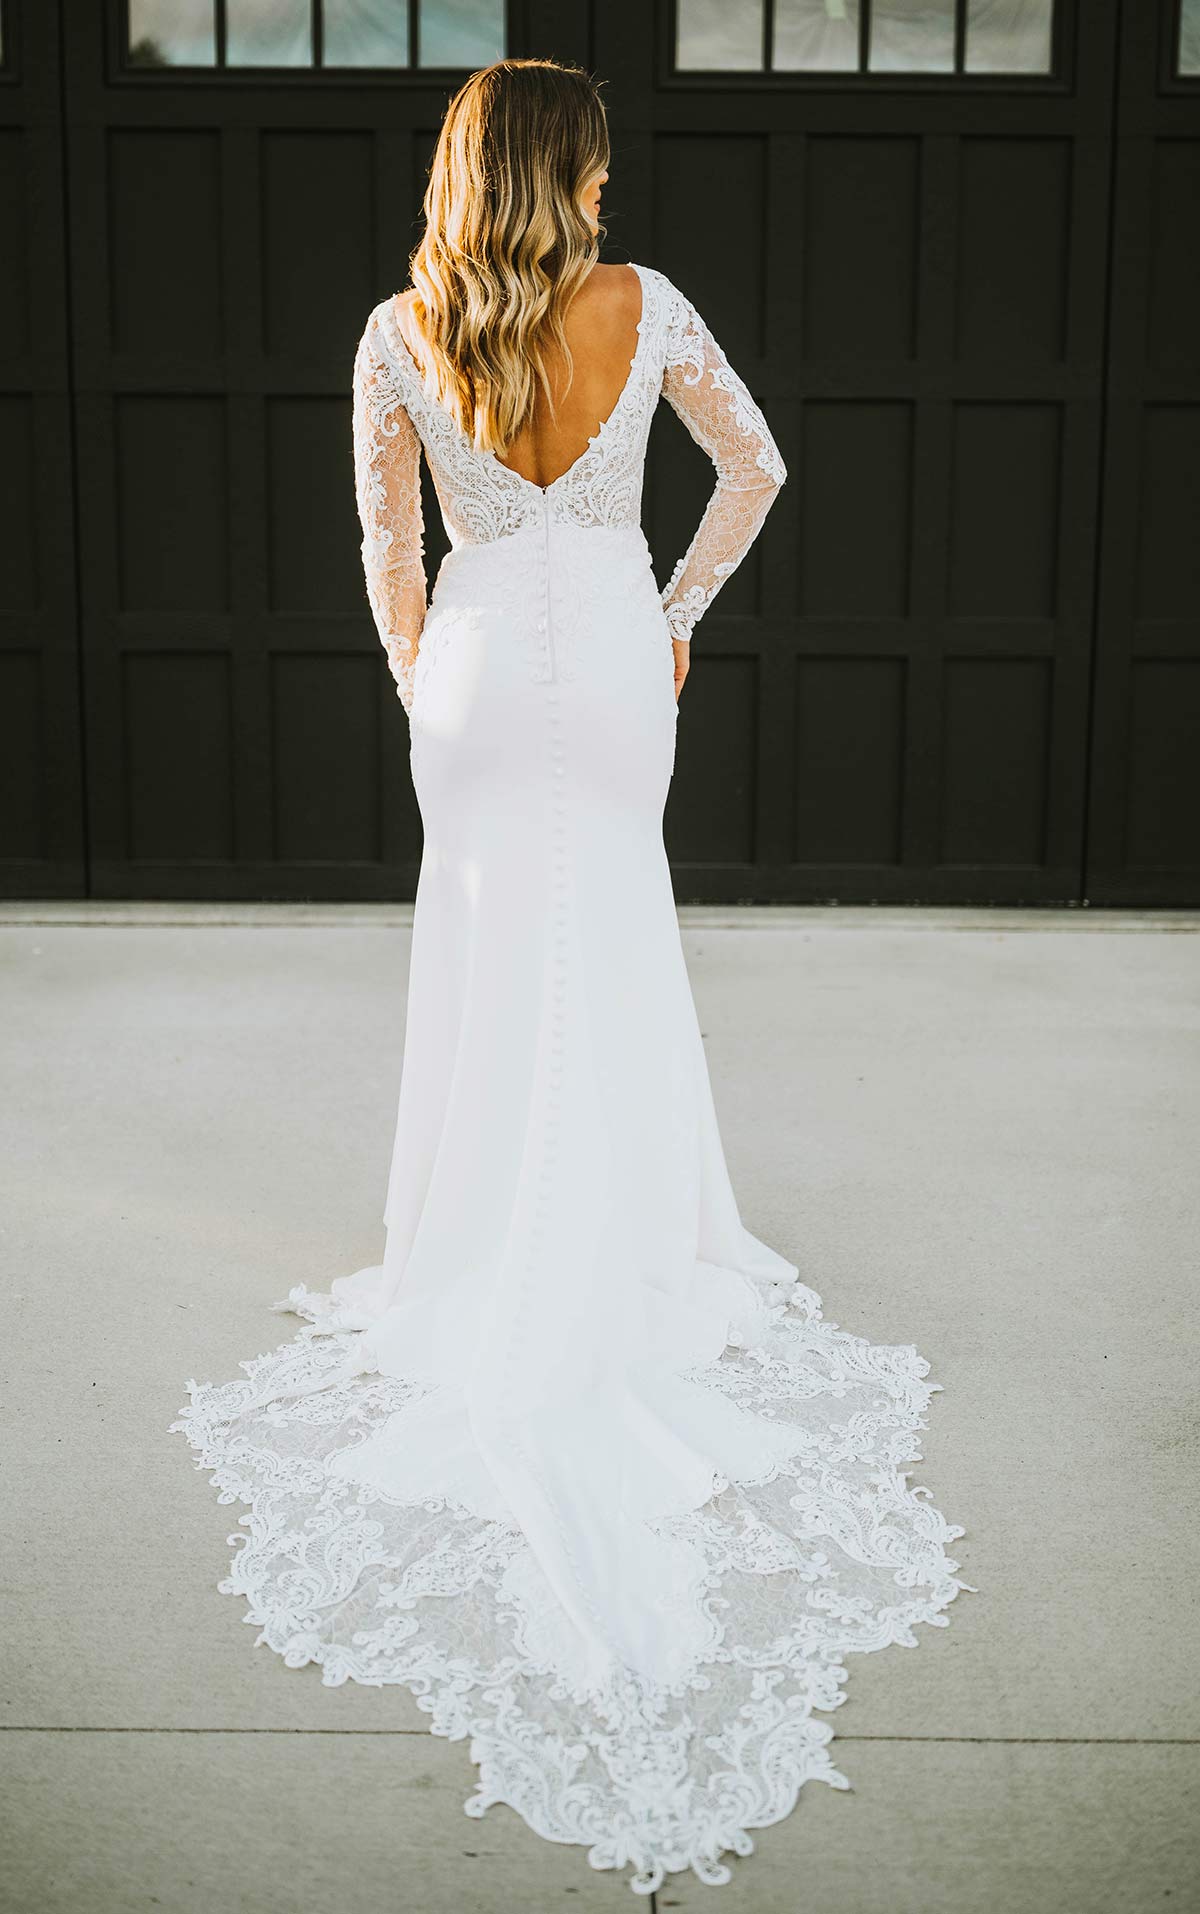 Timeless V back long sleeved wedding gown with scalloped hem and lace motifs